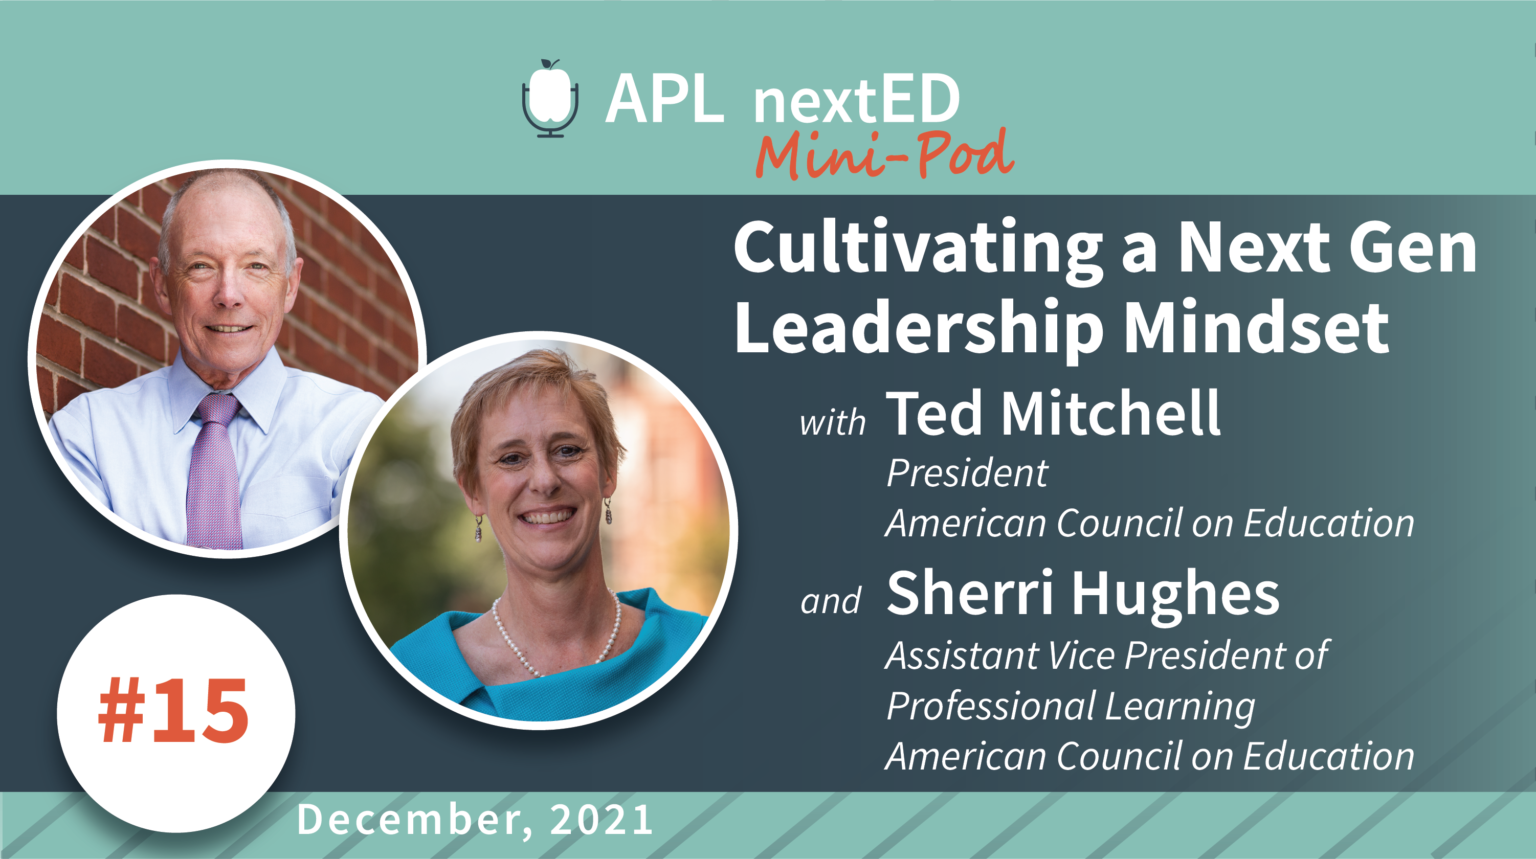 APL nextED Mini-Pod Ep. 15 - Cultivating a Next Gen Leadership Mindset with Ted Mitchell and Sherri Hughes